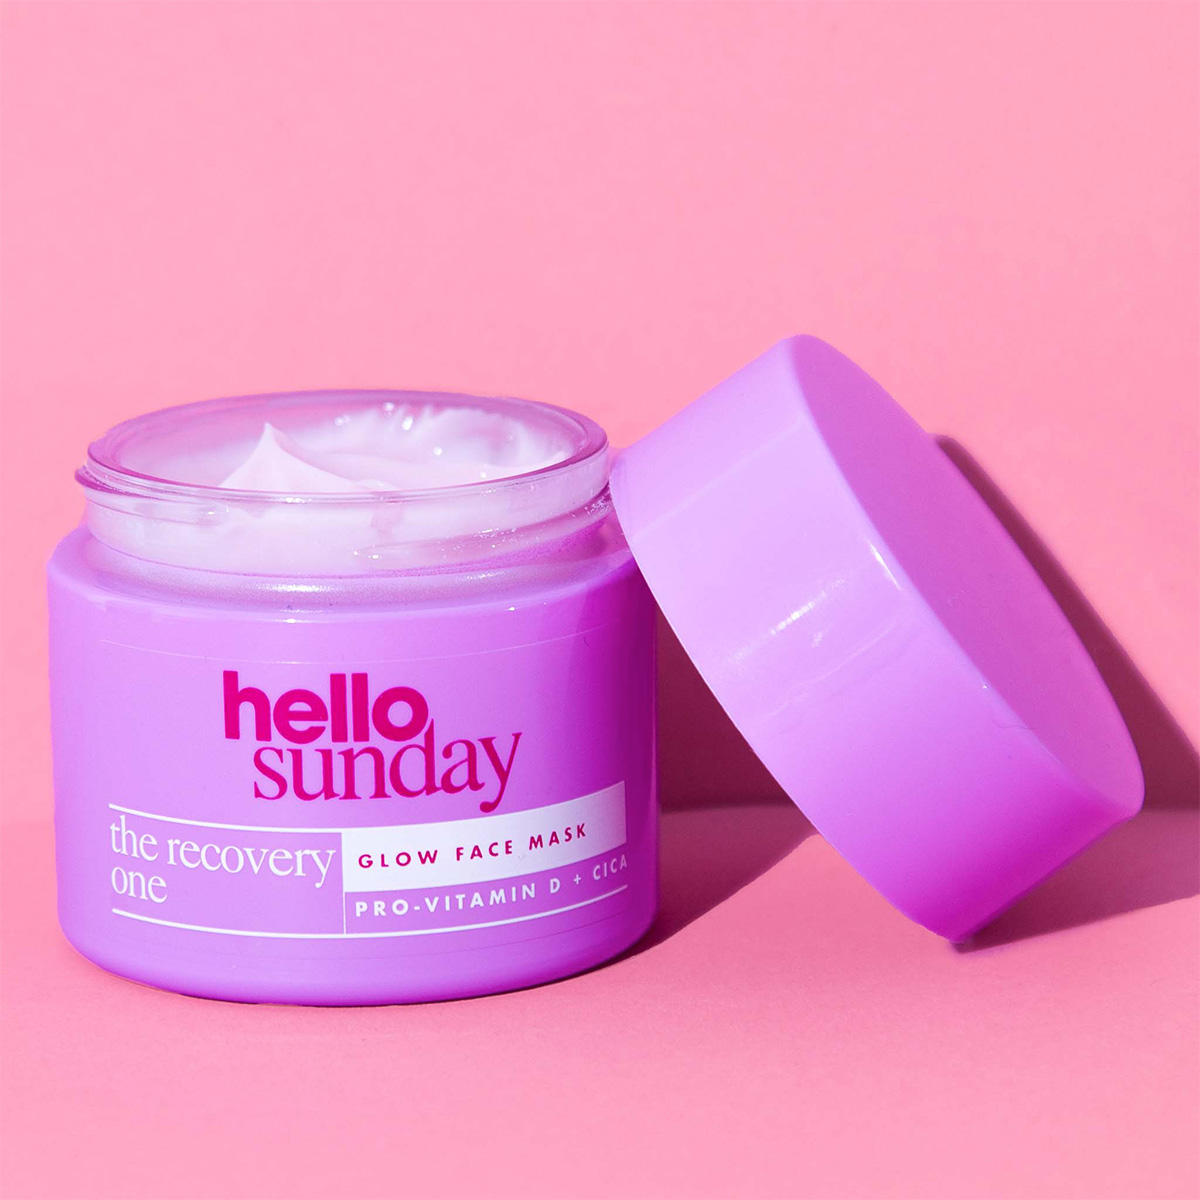 hello sunday the recovery one Glow face mask 50 ml - 6